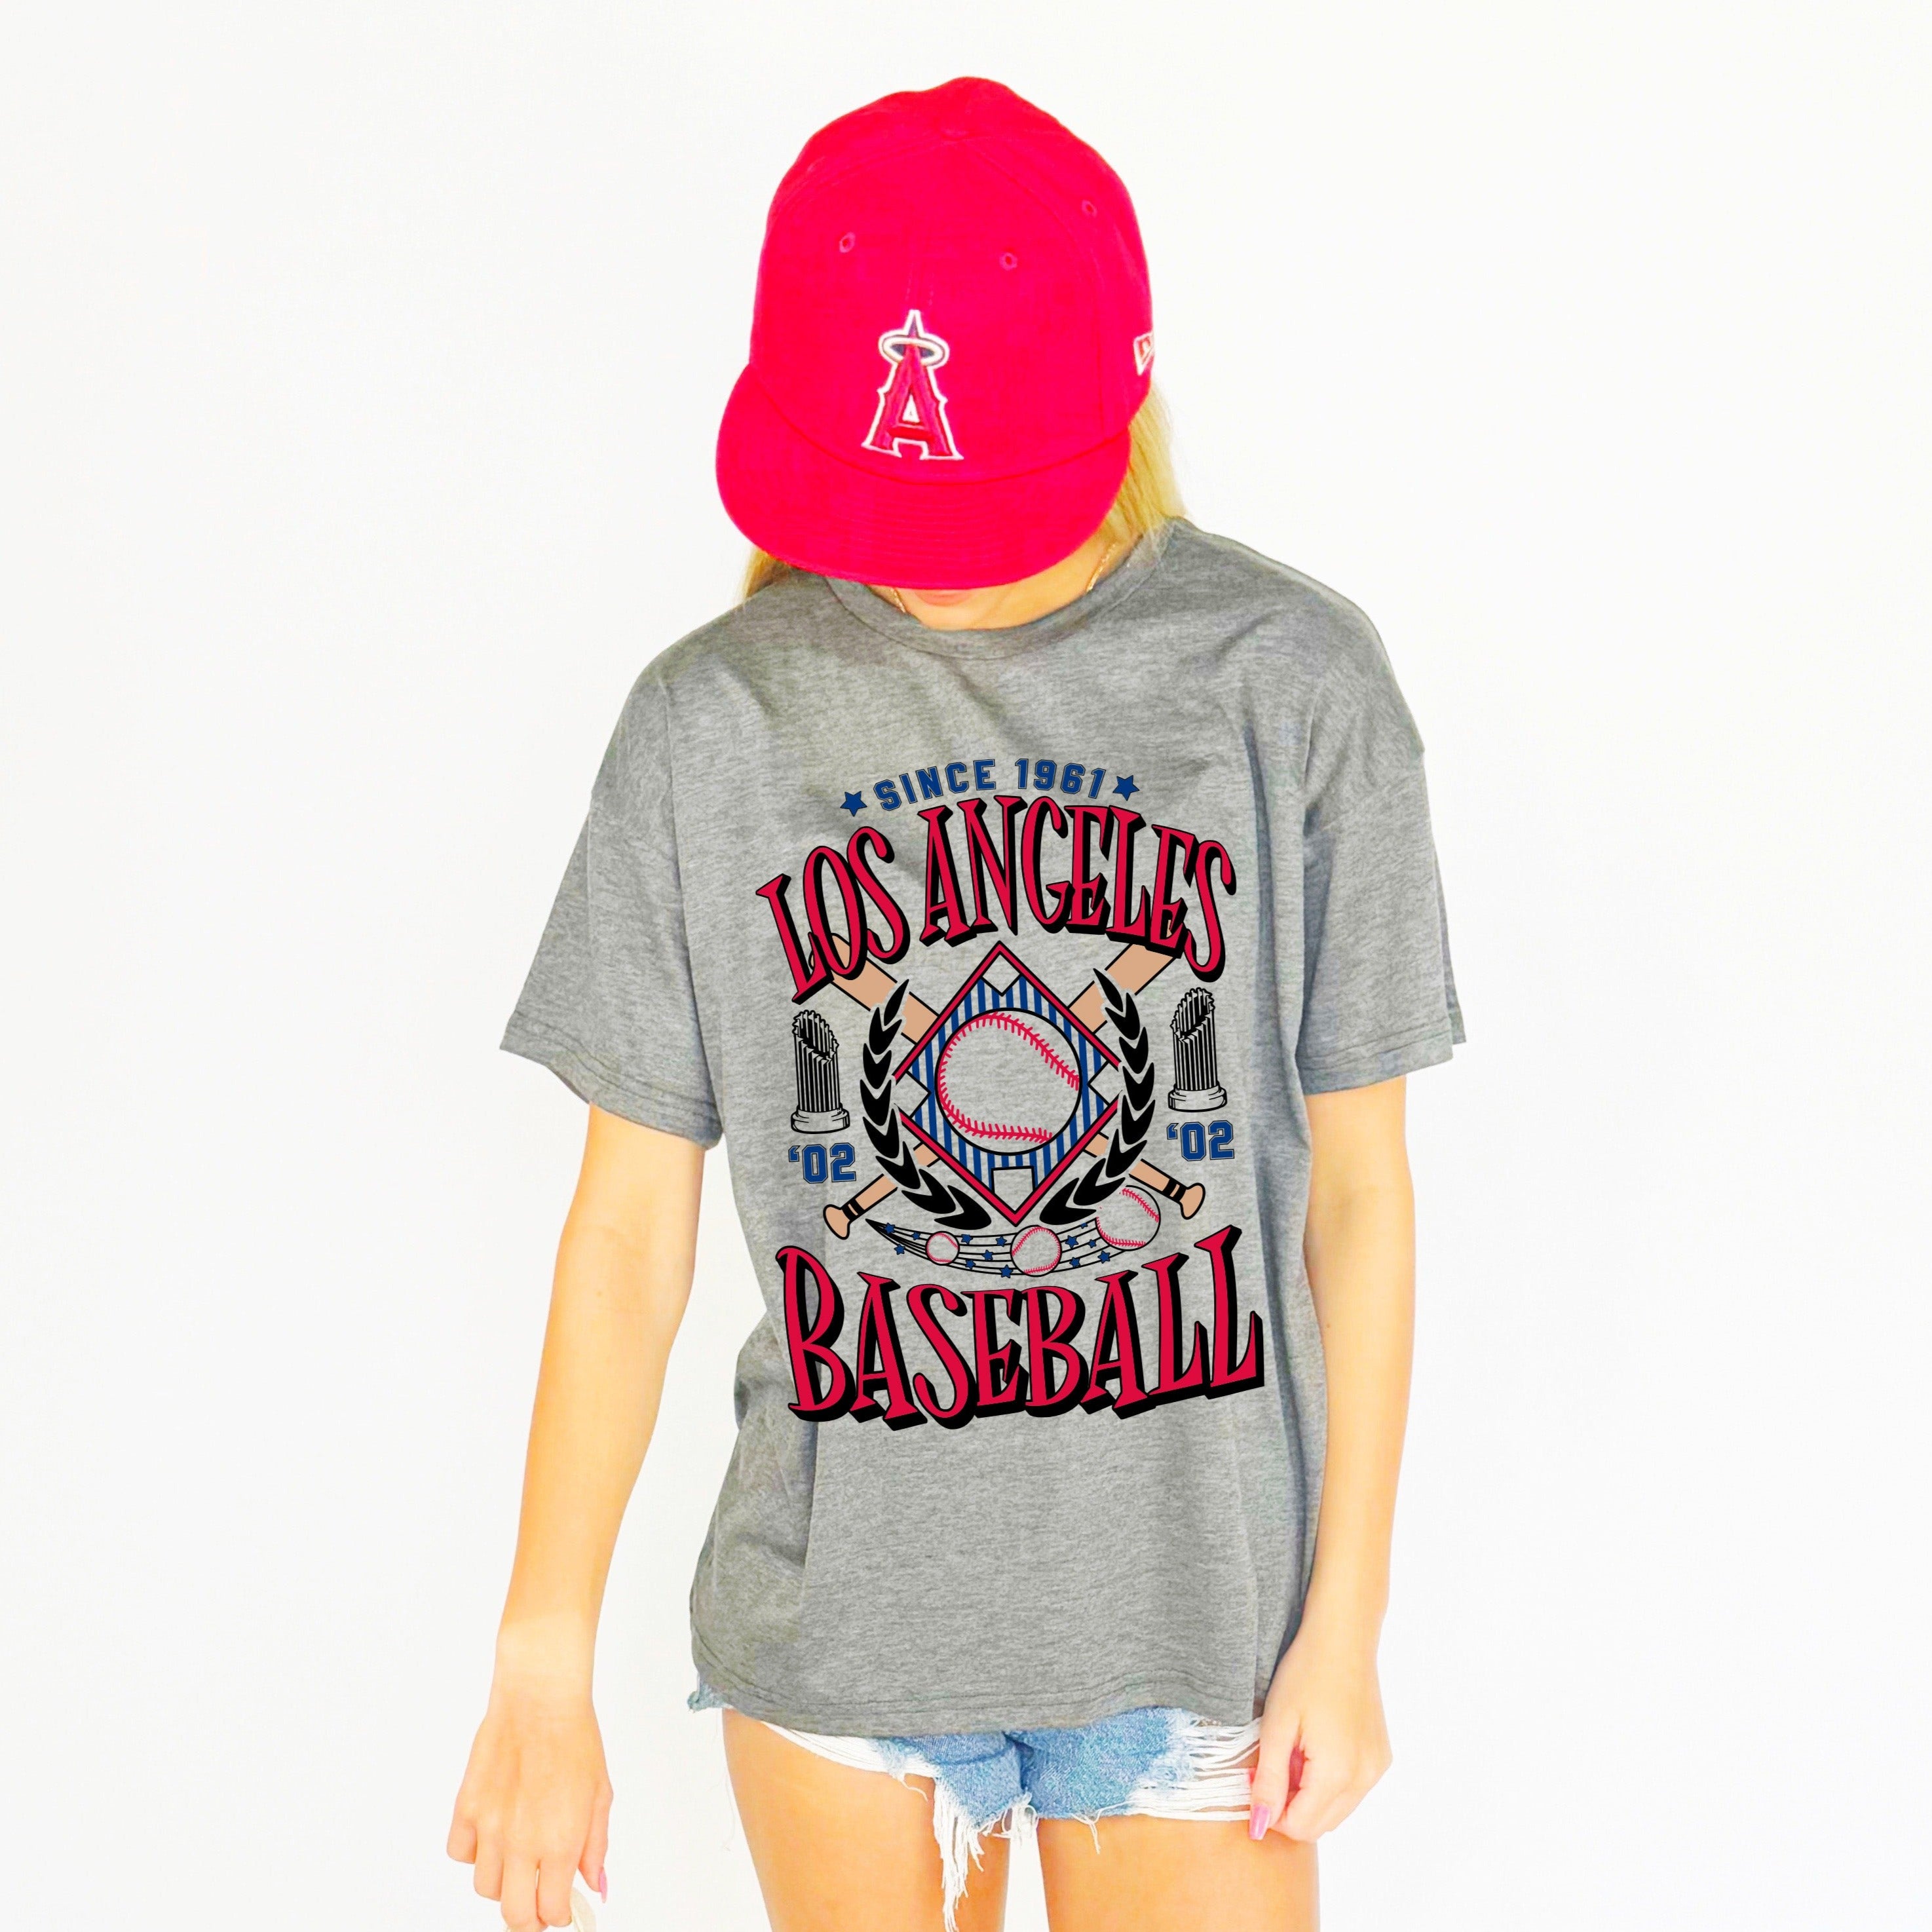 Los Angeles Angels Inspired Baseball Team Youth & Adult tee